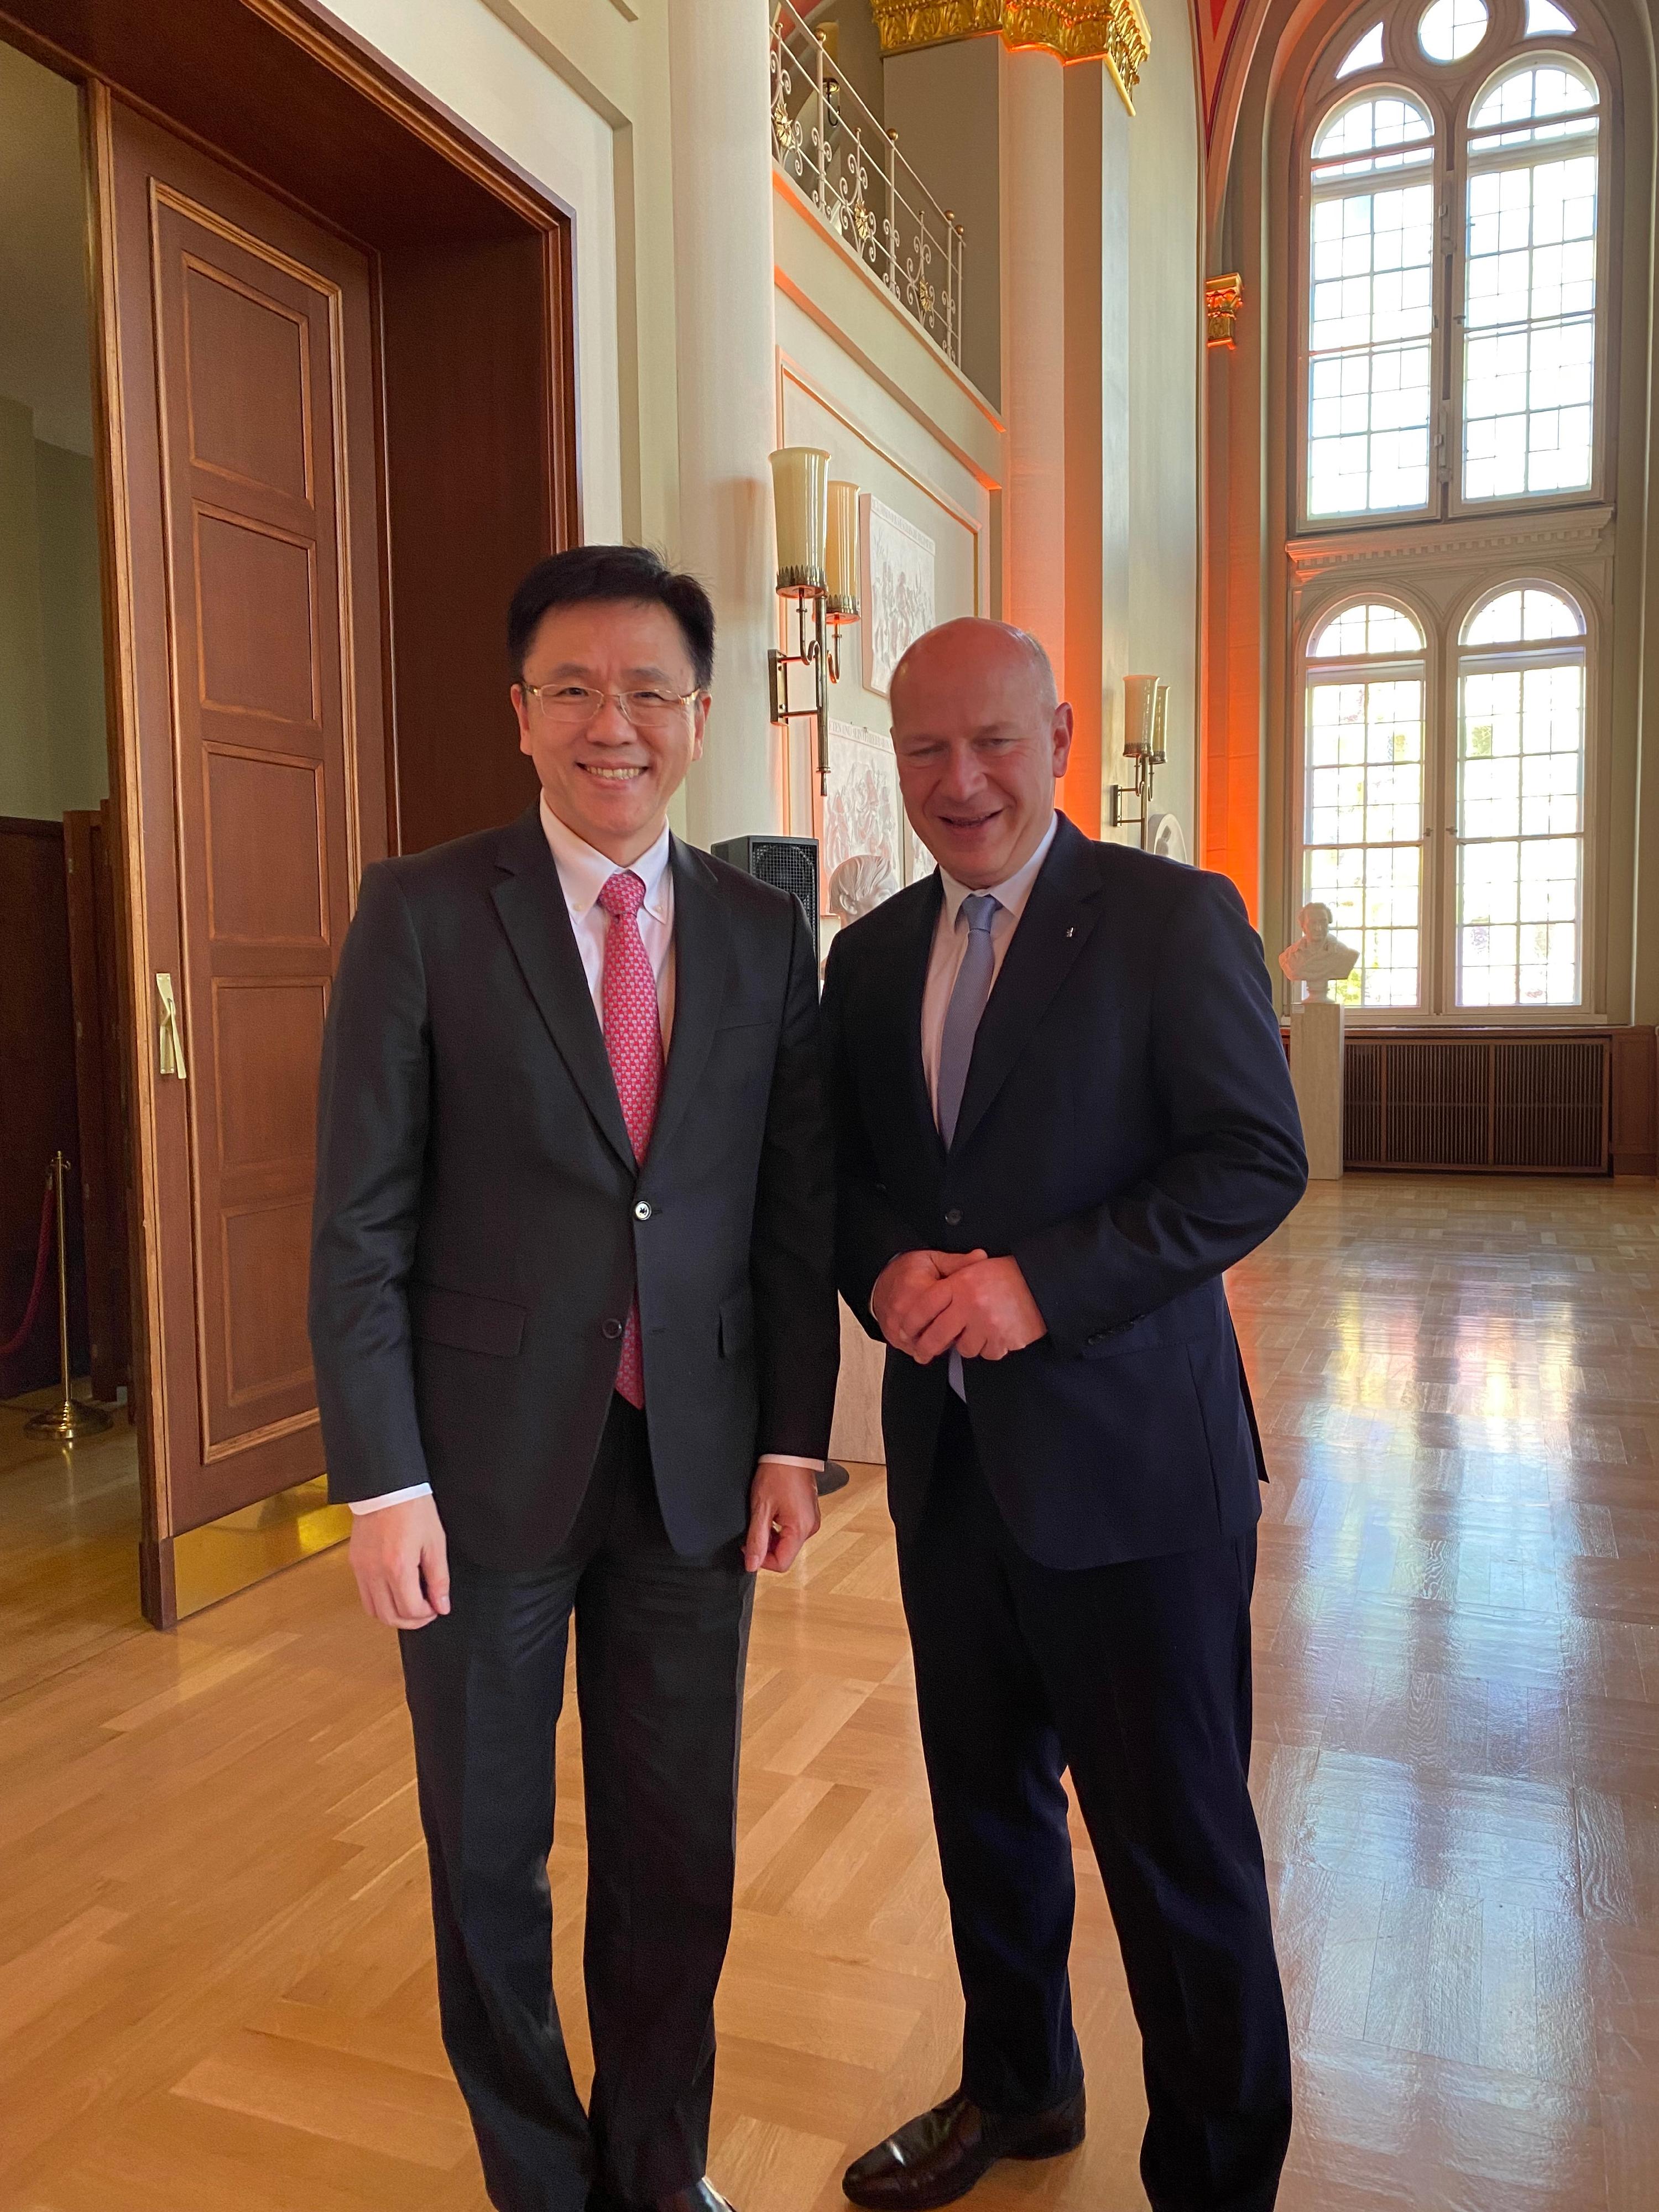 The Secretary for Innovation, Technology and Industry, Professor Sun Dong (left), met with the Governing Mayor of Berlin, Mr Kai Wegner, before the AsiaBerlin Summit’s opening ceremony yesterday (June 12, Berlin time).